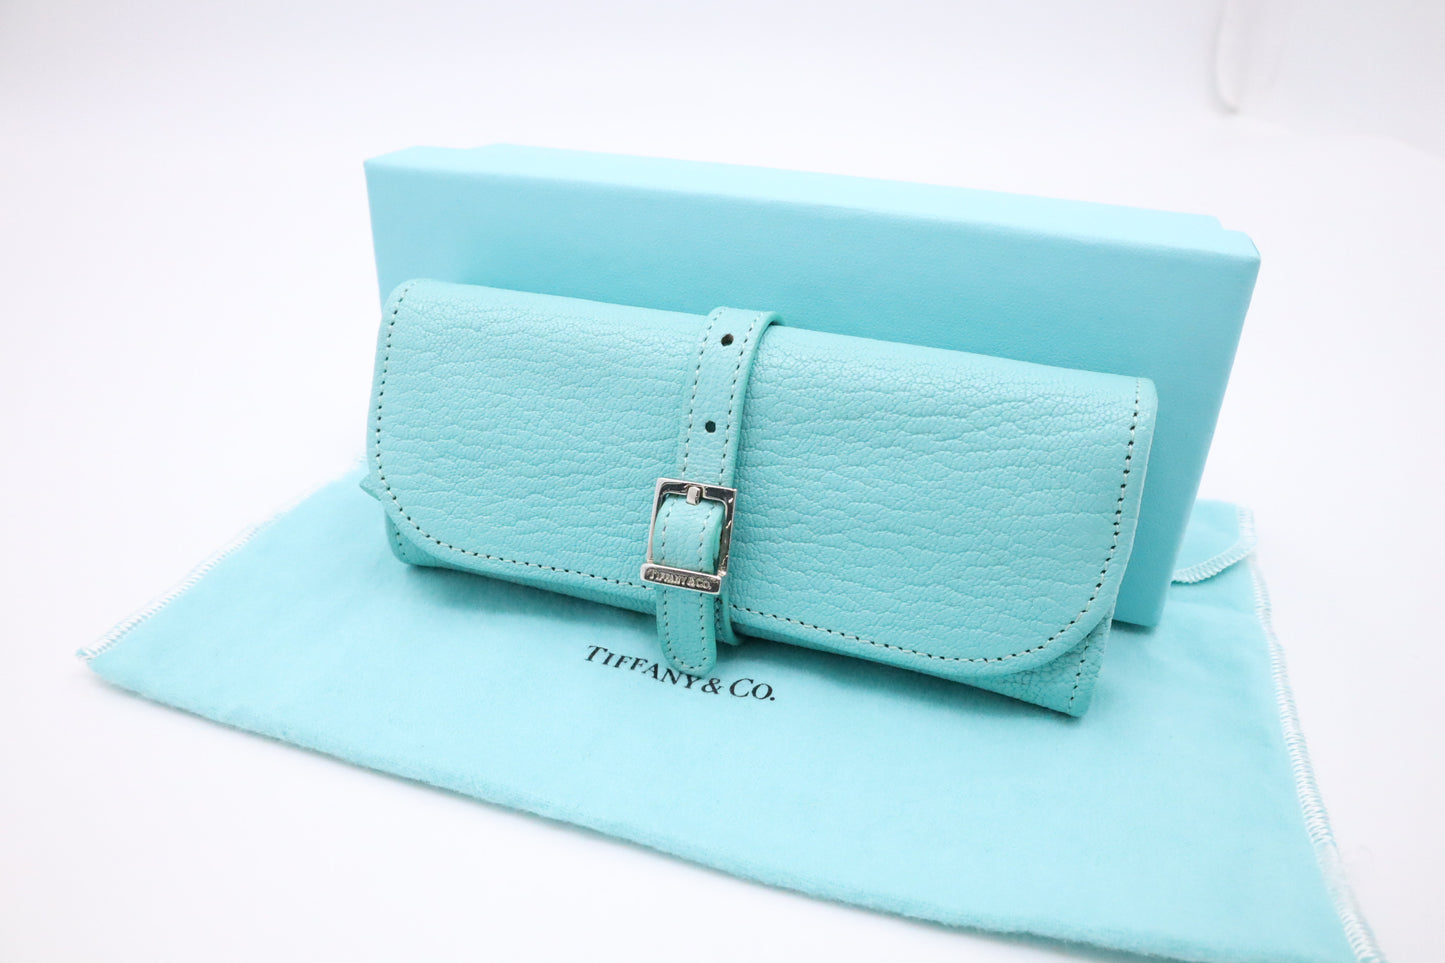 Tiffany&Co. Accessory Case in Tiffany Blue Leather